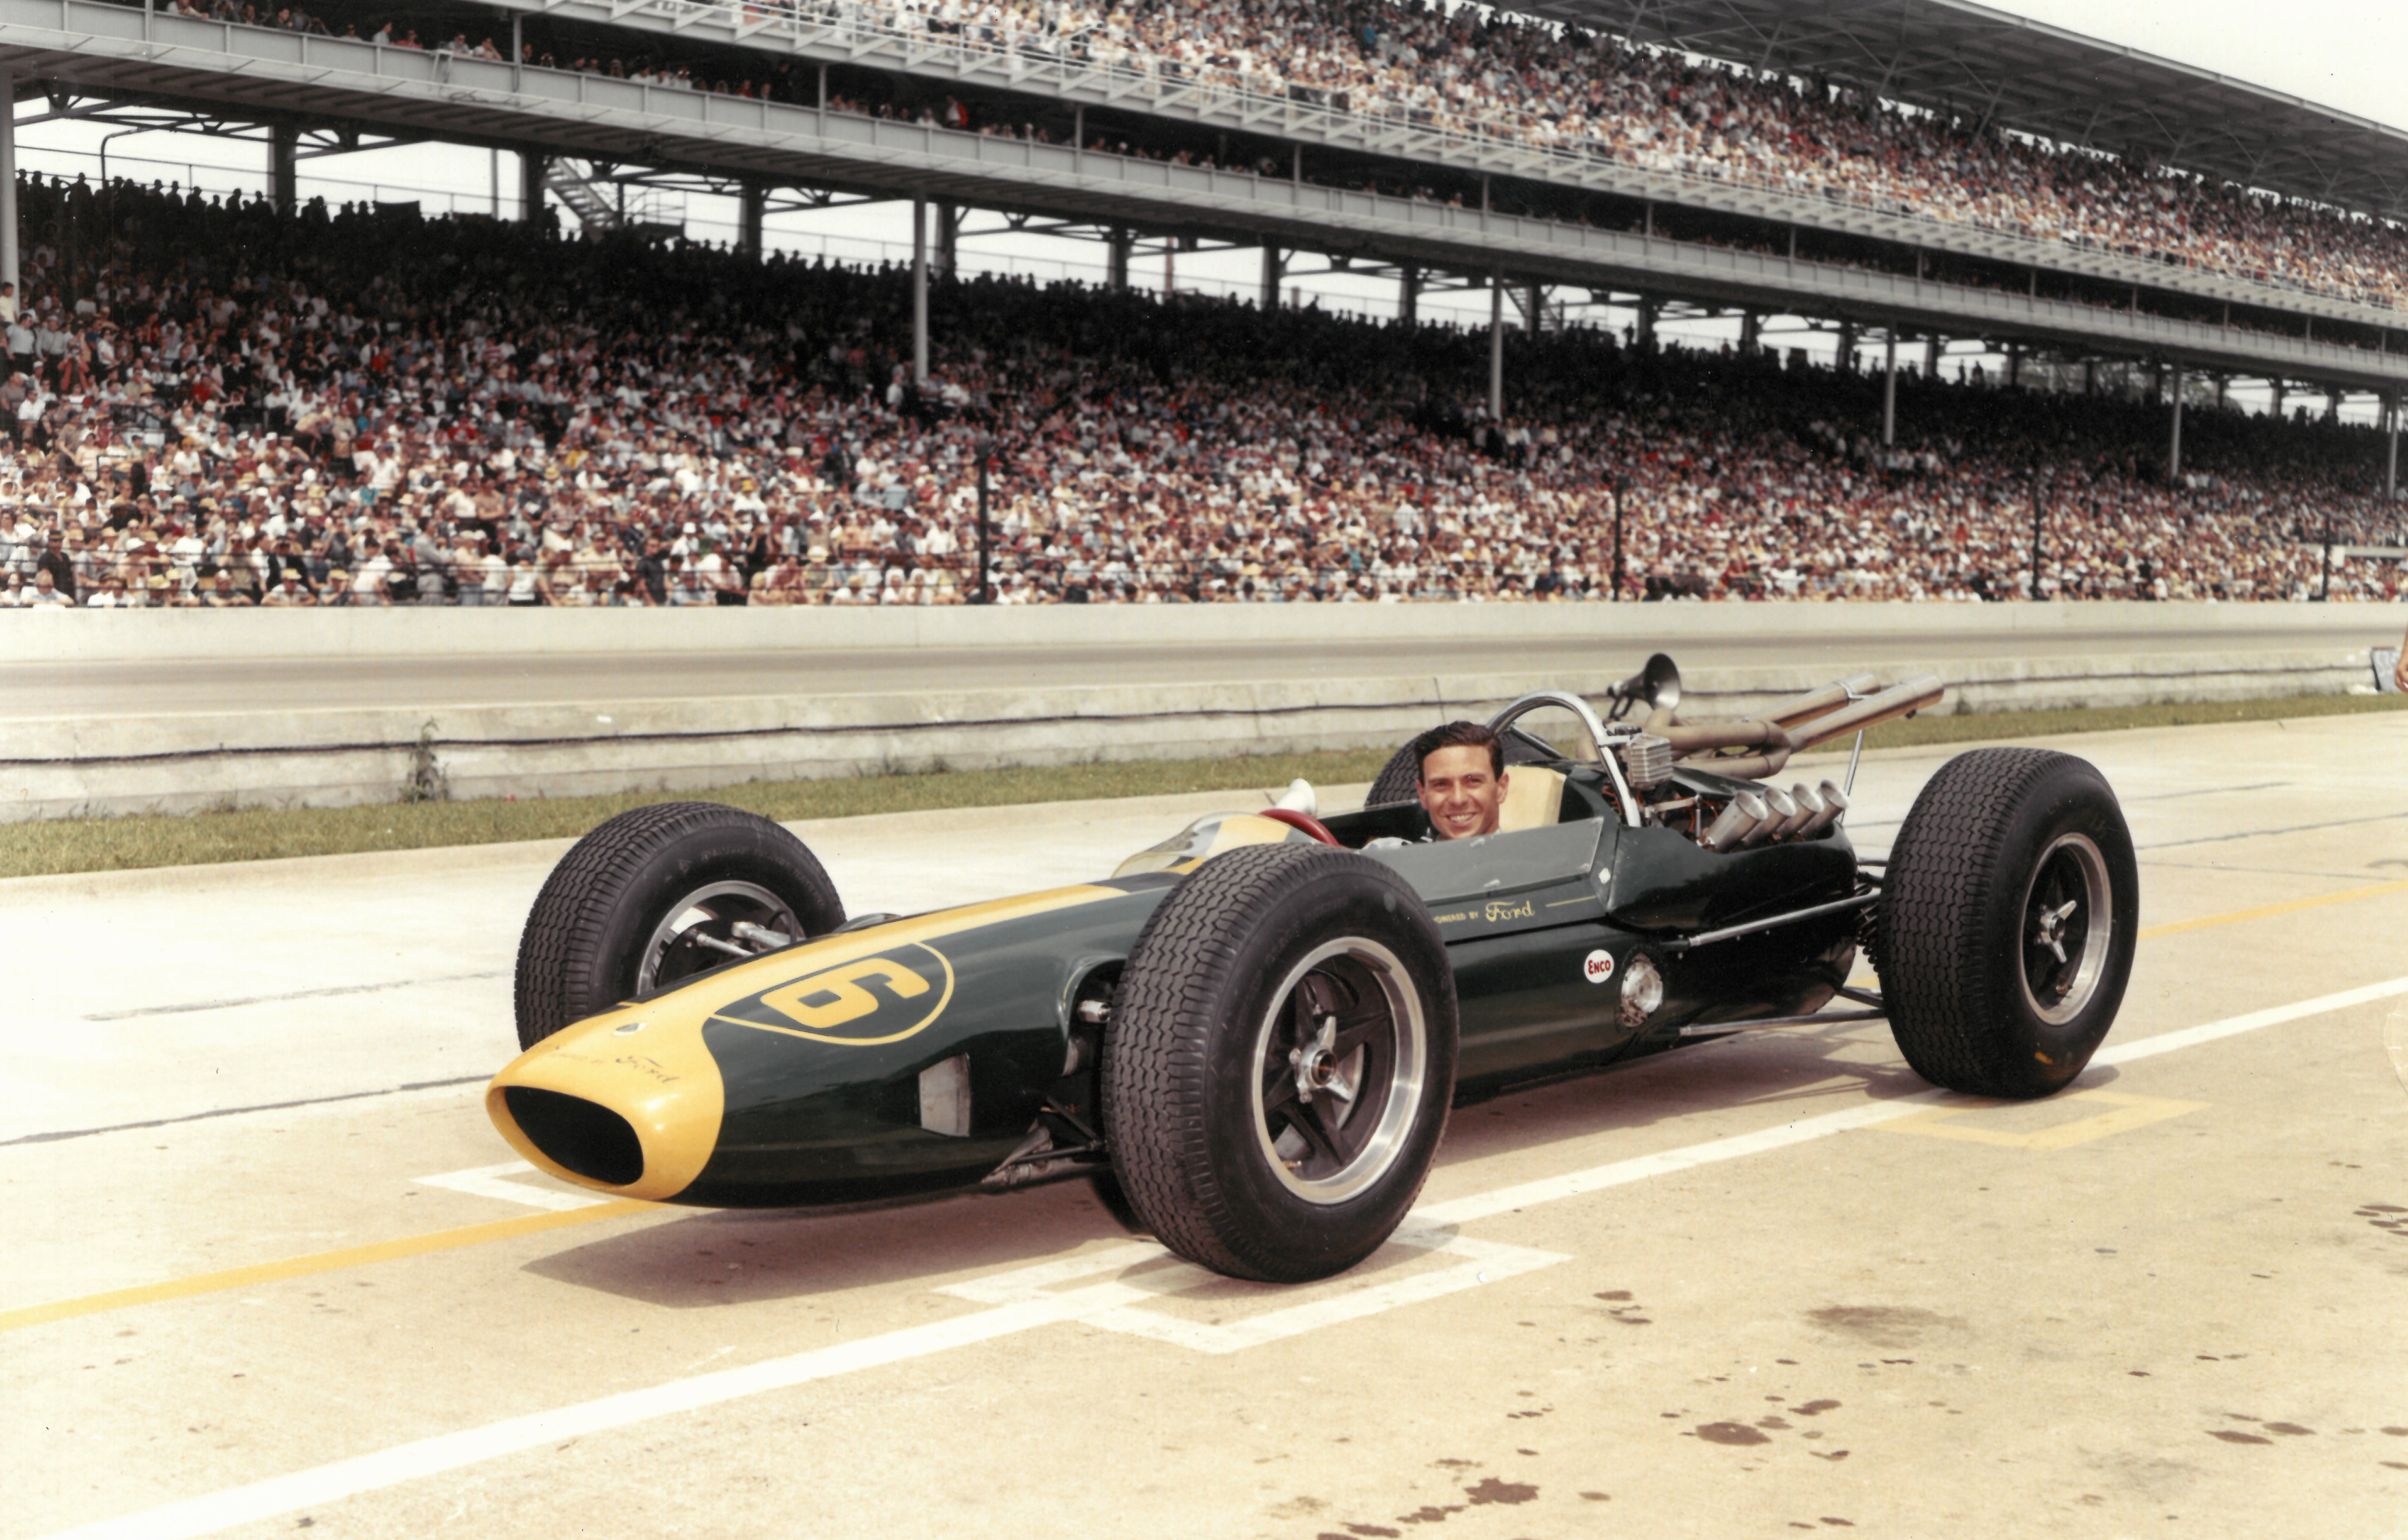 Anniversary of Jim Clark’s historic Indy 500 win marked with announcement on opening of new museum